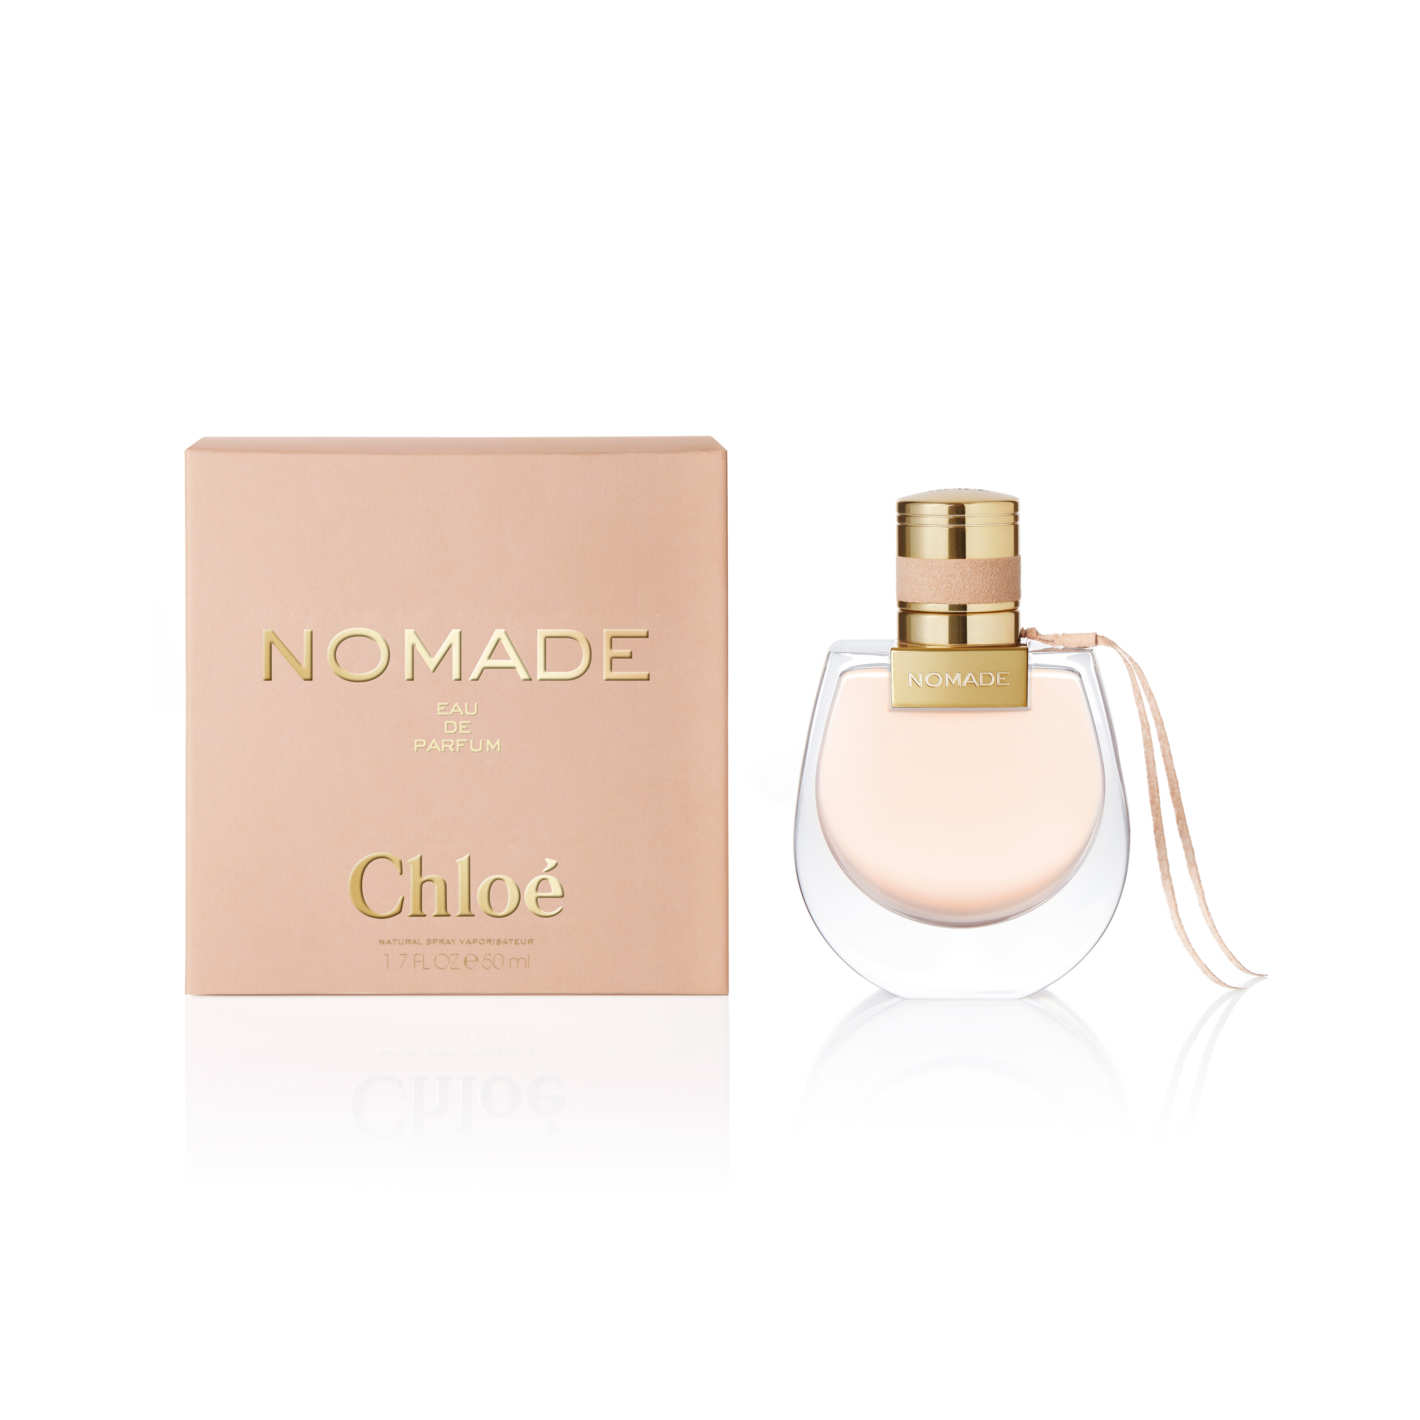 Chloé's Nomade Perfume Smells Fresh and Floral